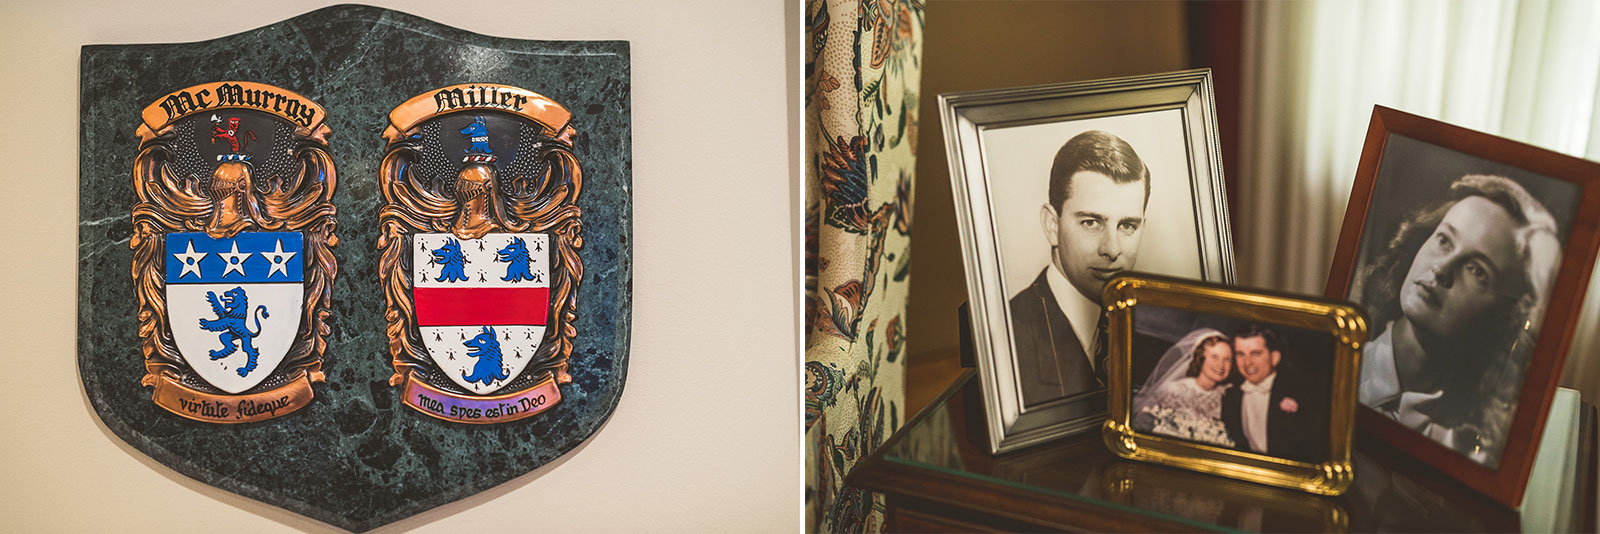 01 coat of arms1 - Kristina + Dave // Wedding Photographer in Chicago